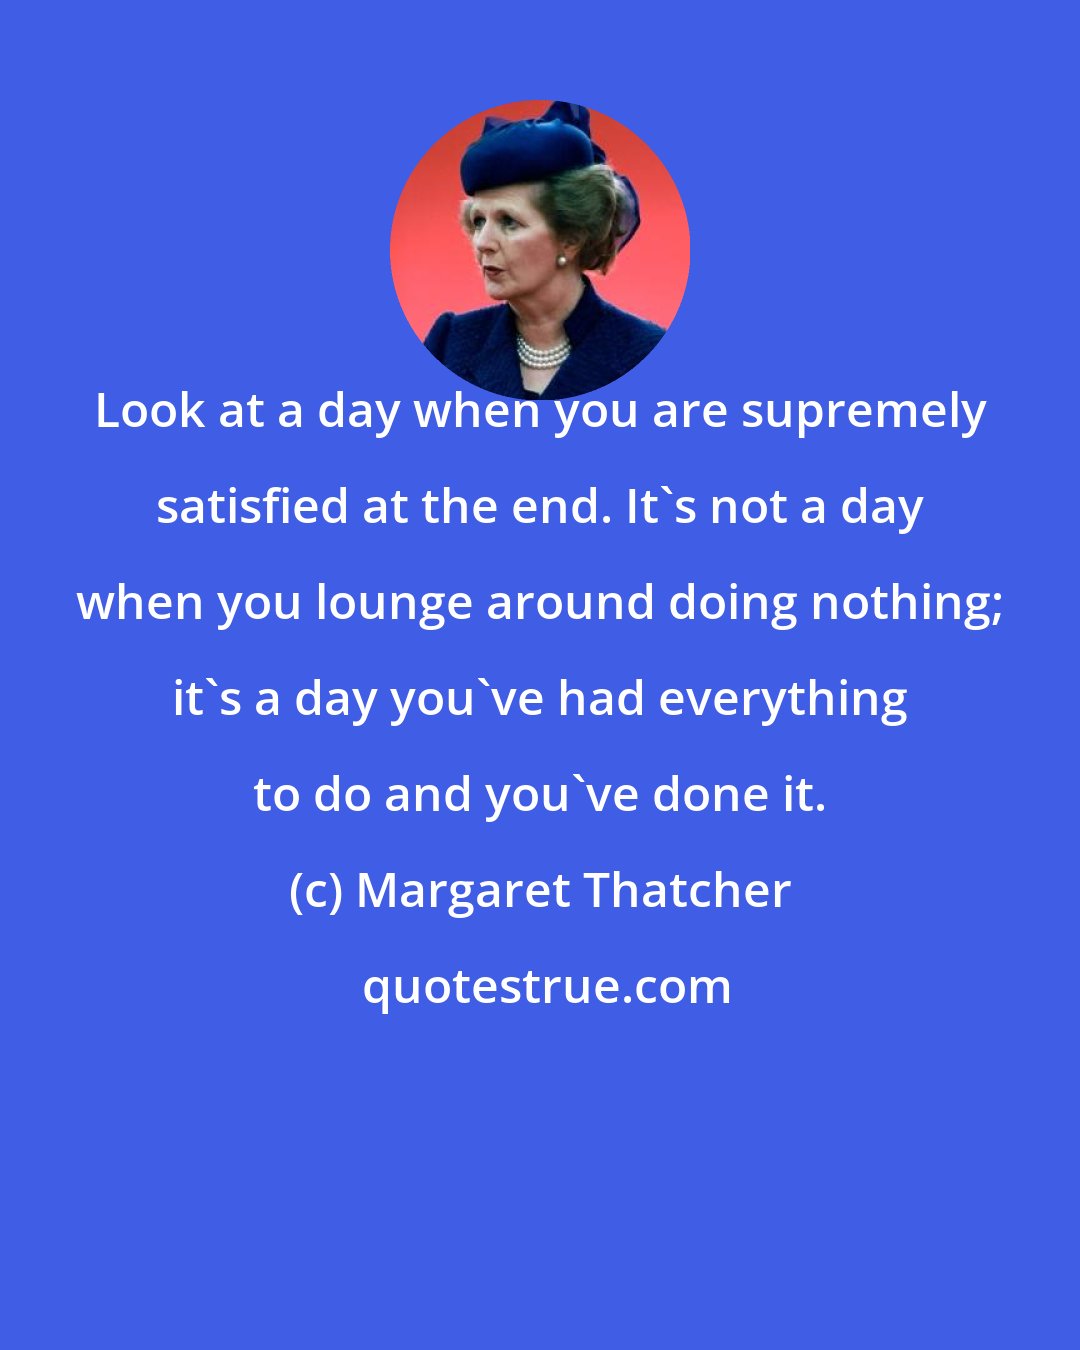 Margaret Thatcher: Look at a day when you are supremely satisfied at the end. It's not a day when you lounge around doing nothing; it's a day you've had everything to do and you've done it.